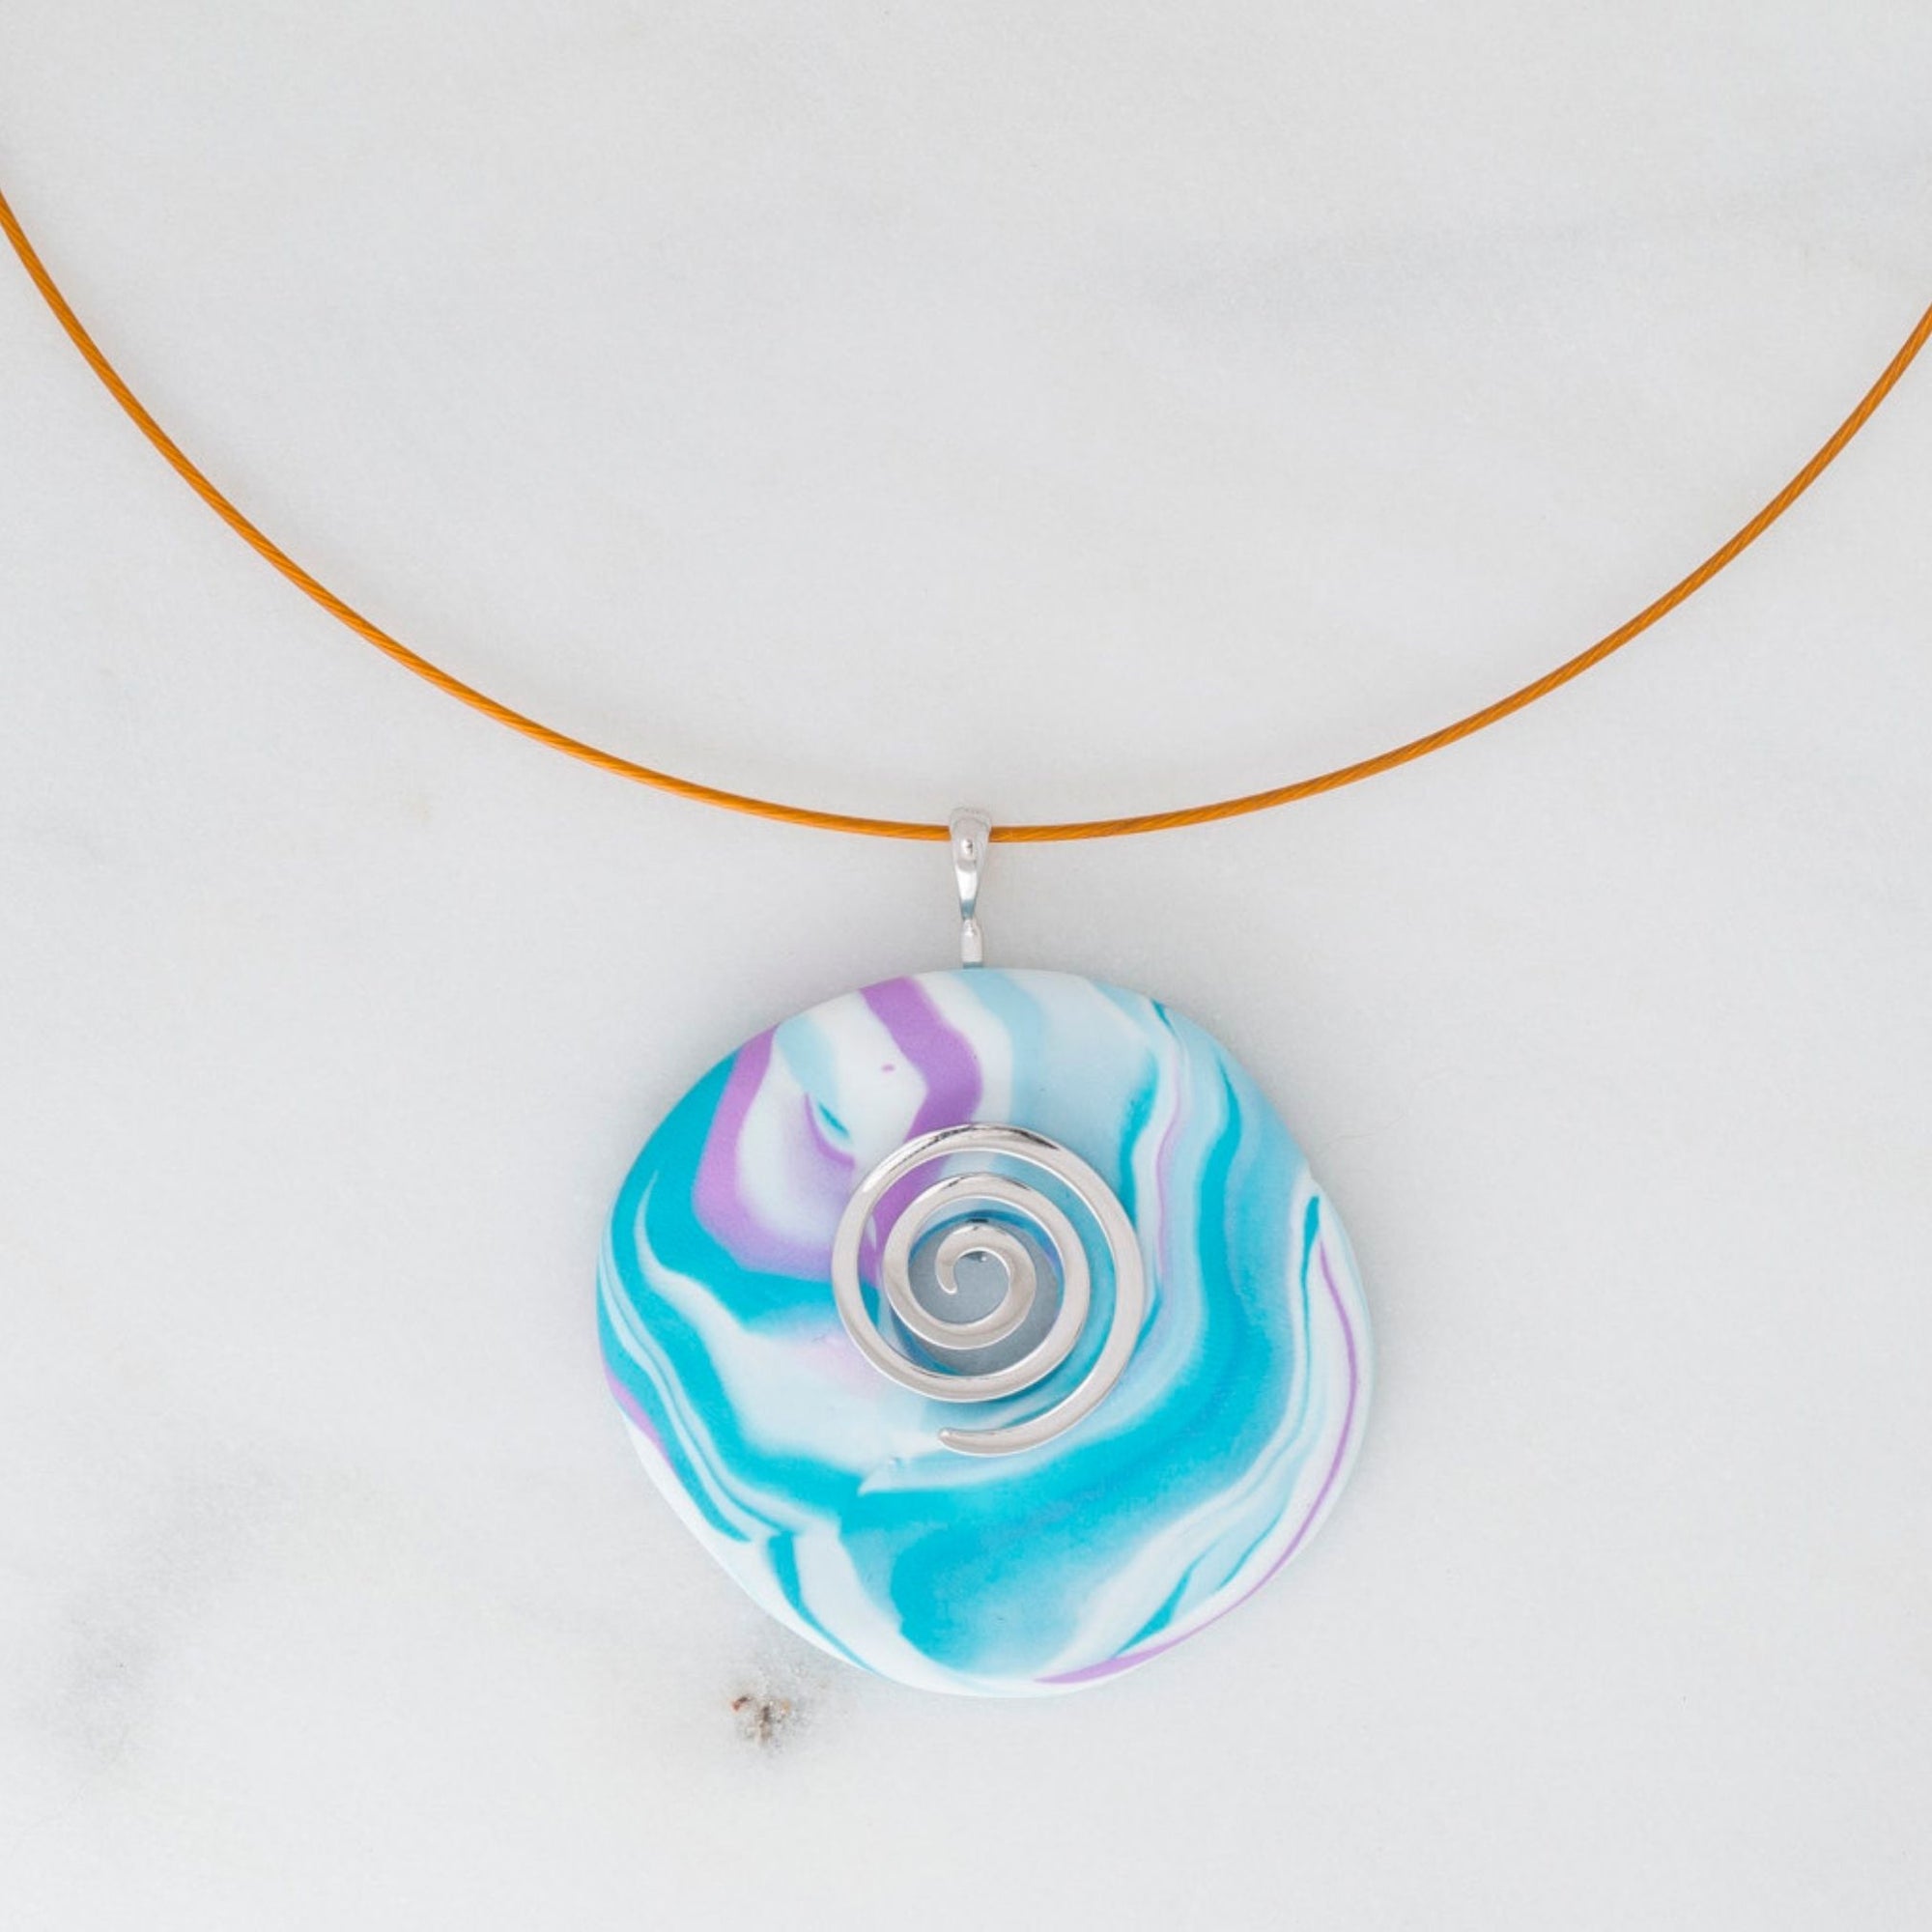 Serenity Swirl handmade Pendant by Marina-Ra Designs in turquoise, white and mauve with sterlings silver swirl